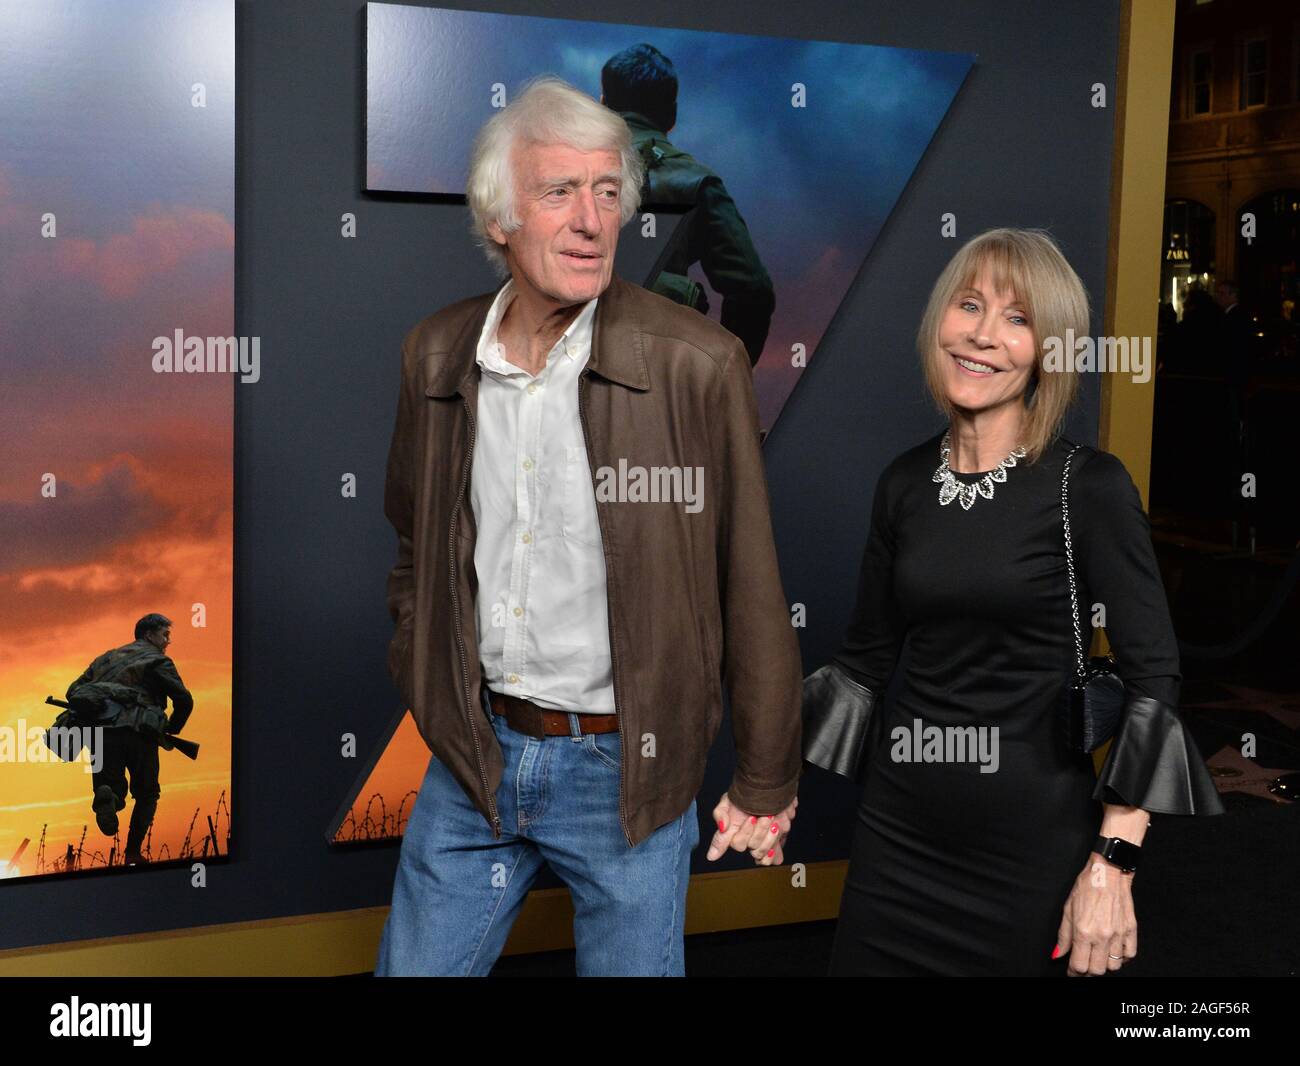 Los Angeles, United States. 18th Dec, 2019. English cinematographer Roger Deakins and his wife Isabella James Purefoy Ellis attend the premiere of the motion picture war drama '1917' at the TCL Chinese Theatre in the Hollywood section of Los Angeles on Wednesday, December 18, 2019. Storyline: Two young British privates during the First World War are given an impossible mission: deliver a message deep in enemy territory that will stop 1,600 men, and one of the soldier's brothers, from walking straight into a deadly trap. Photo by Jim Ruymen/UPI Credit: UPI/Alamy Live News Stock Photo